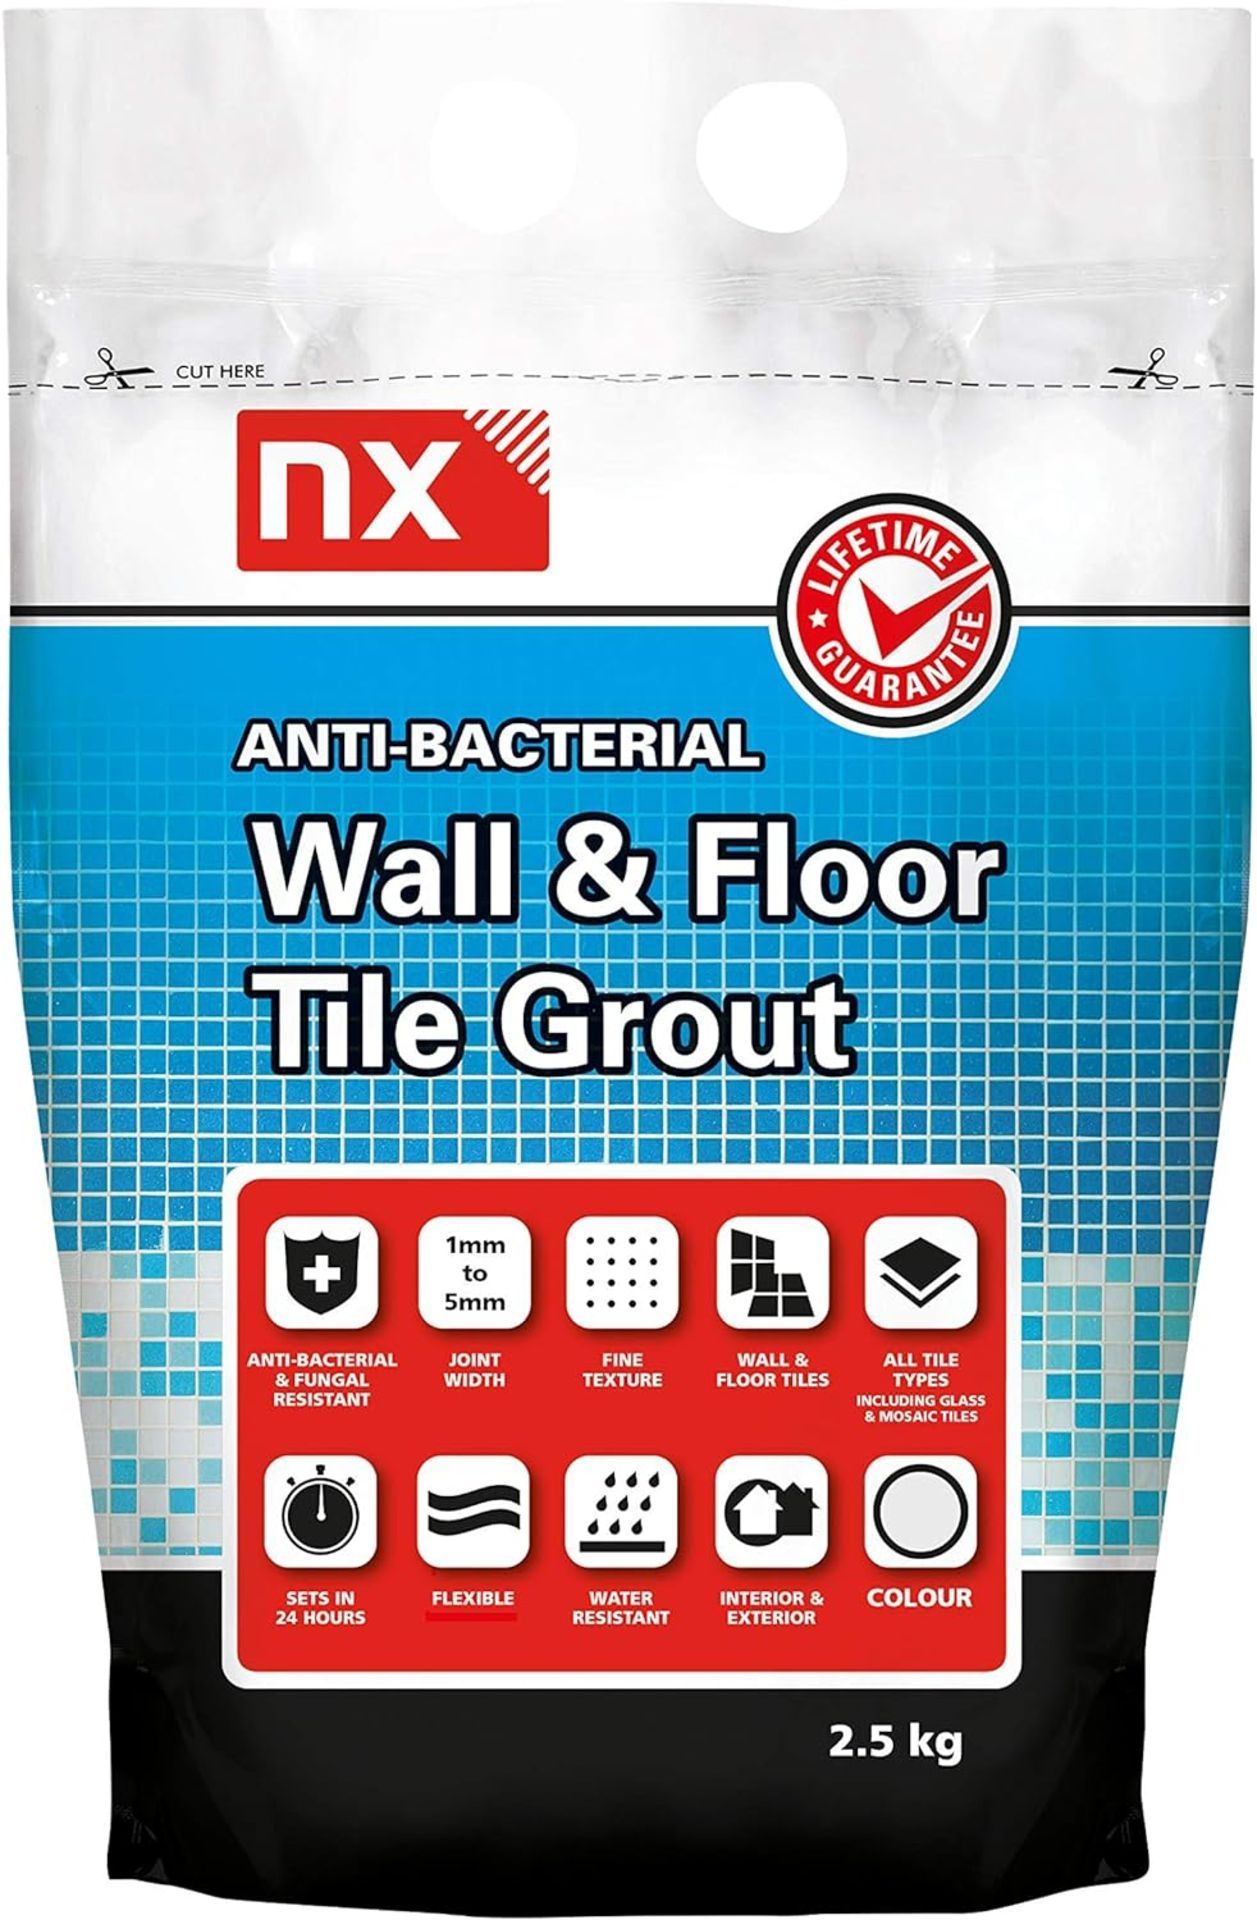 36 X 2.5KG BAGS OF NX ANTI-BACTERIAL WALL & FLOOR OXFORD STONE. FINE TEXTURE. ALL TILE TYPES. SETS